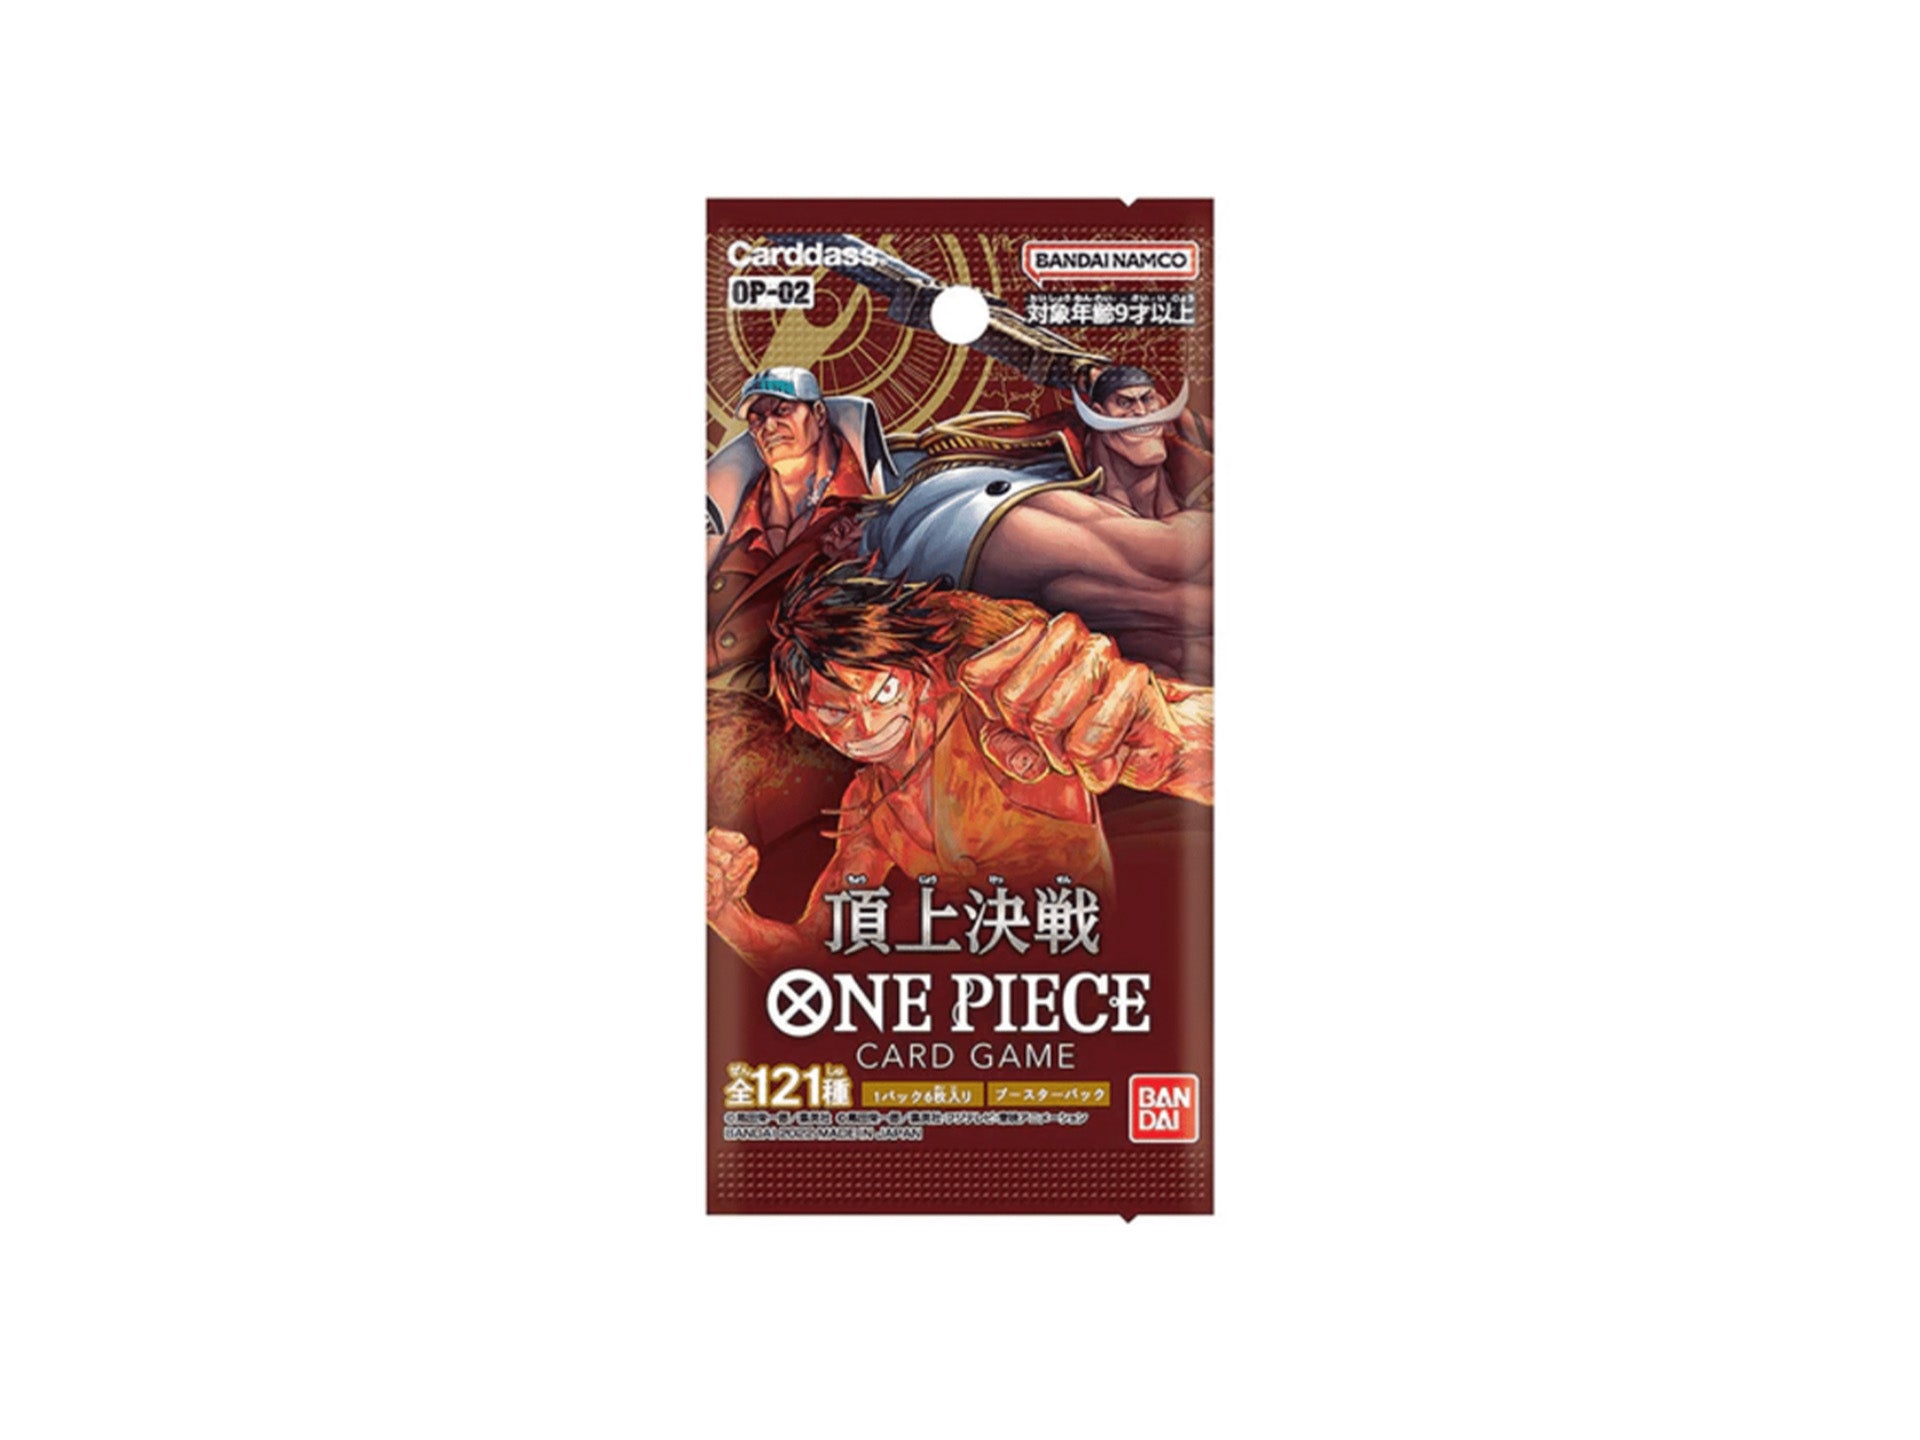 One Piece Boosterpack Japans OP-02